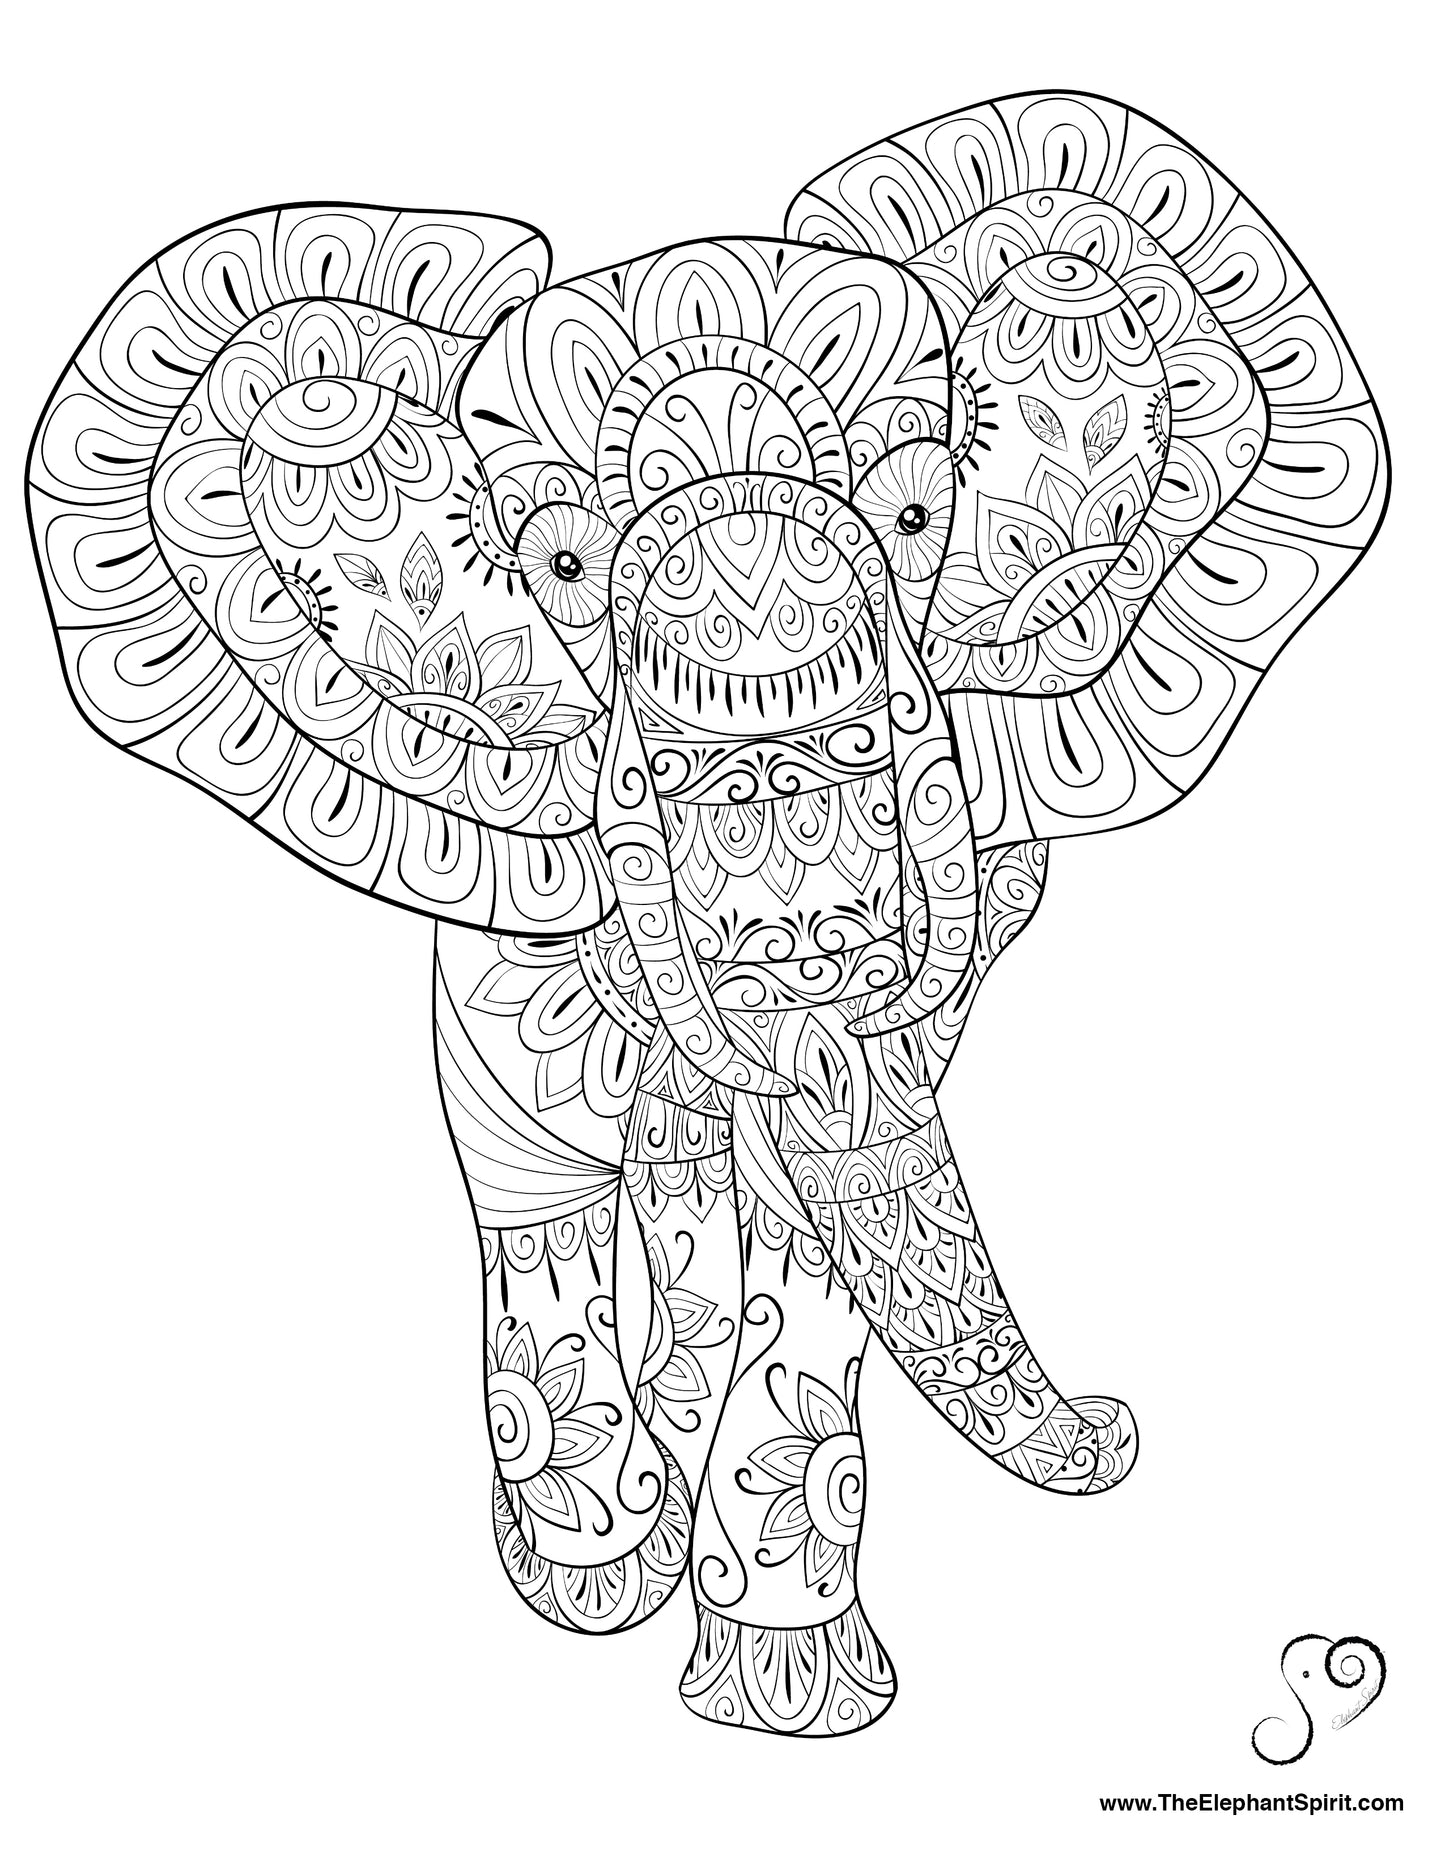 FREE Coloring Page 11-17